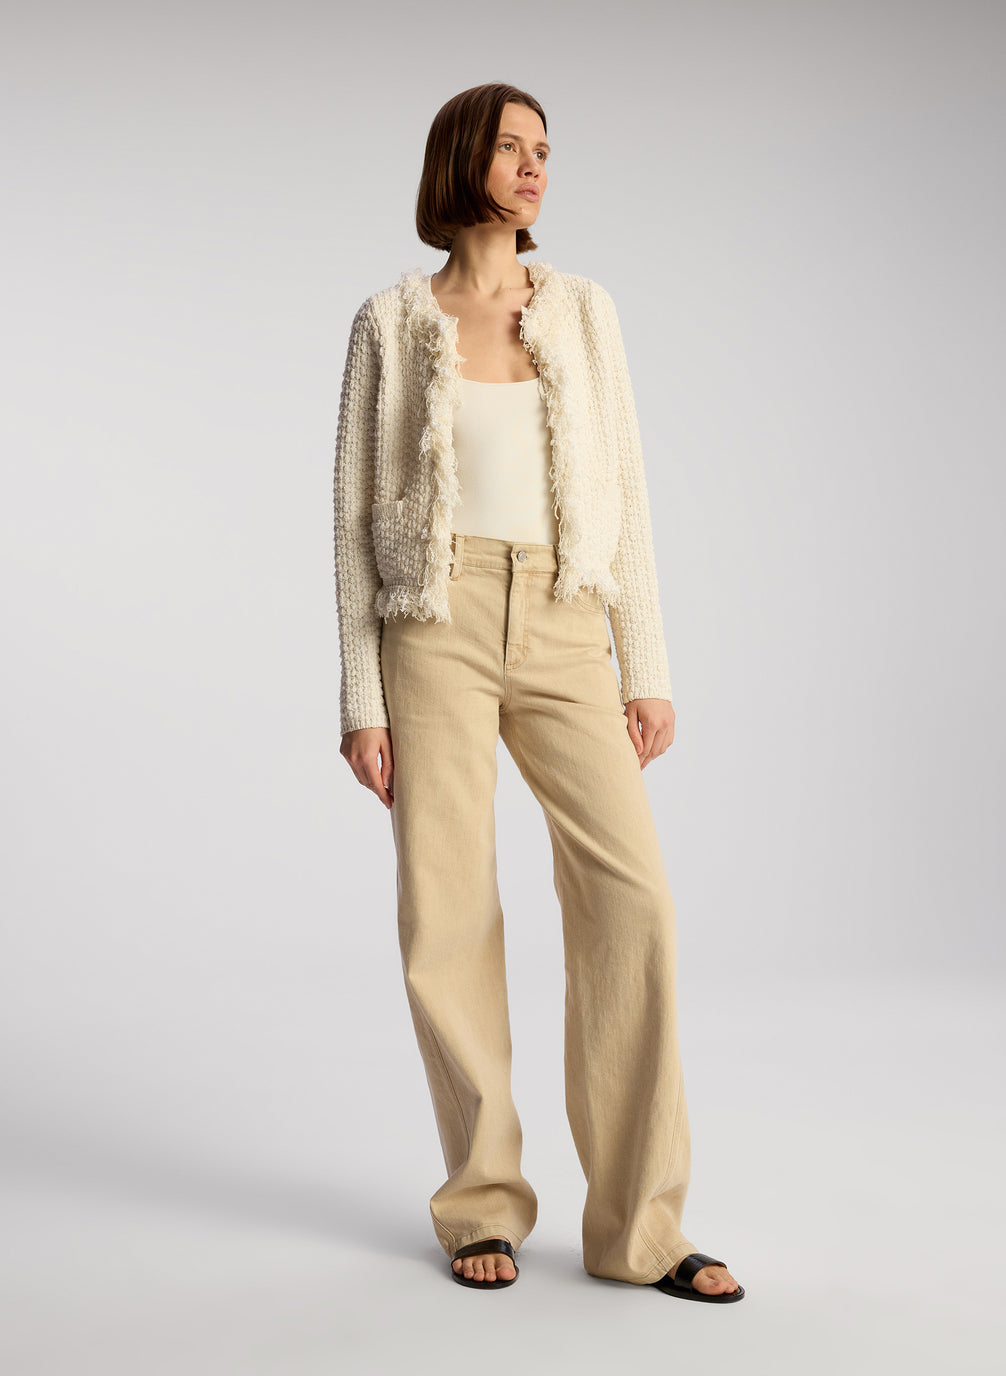 side view of woman wearing cream fringed cardigan and tan pants